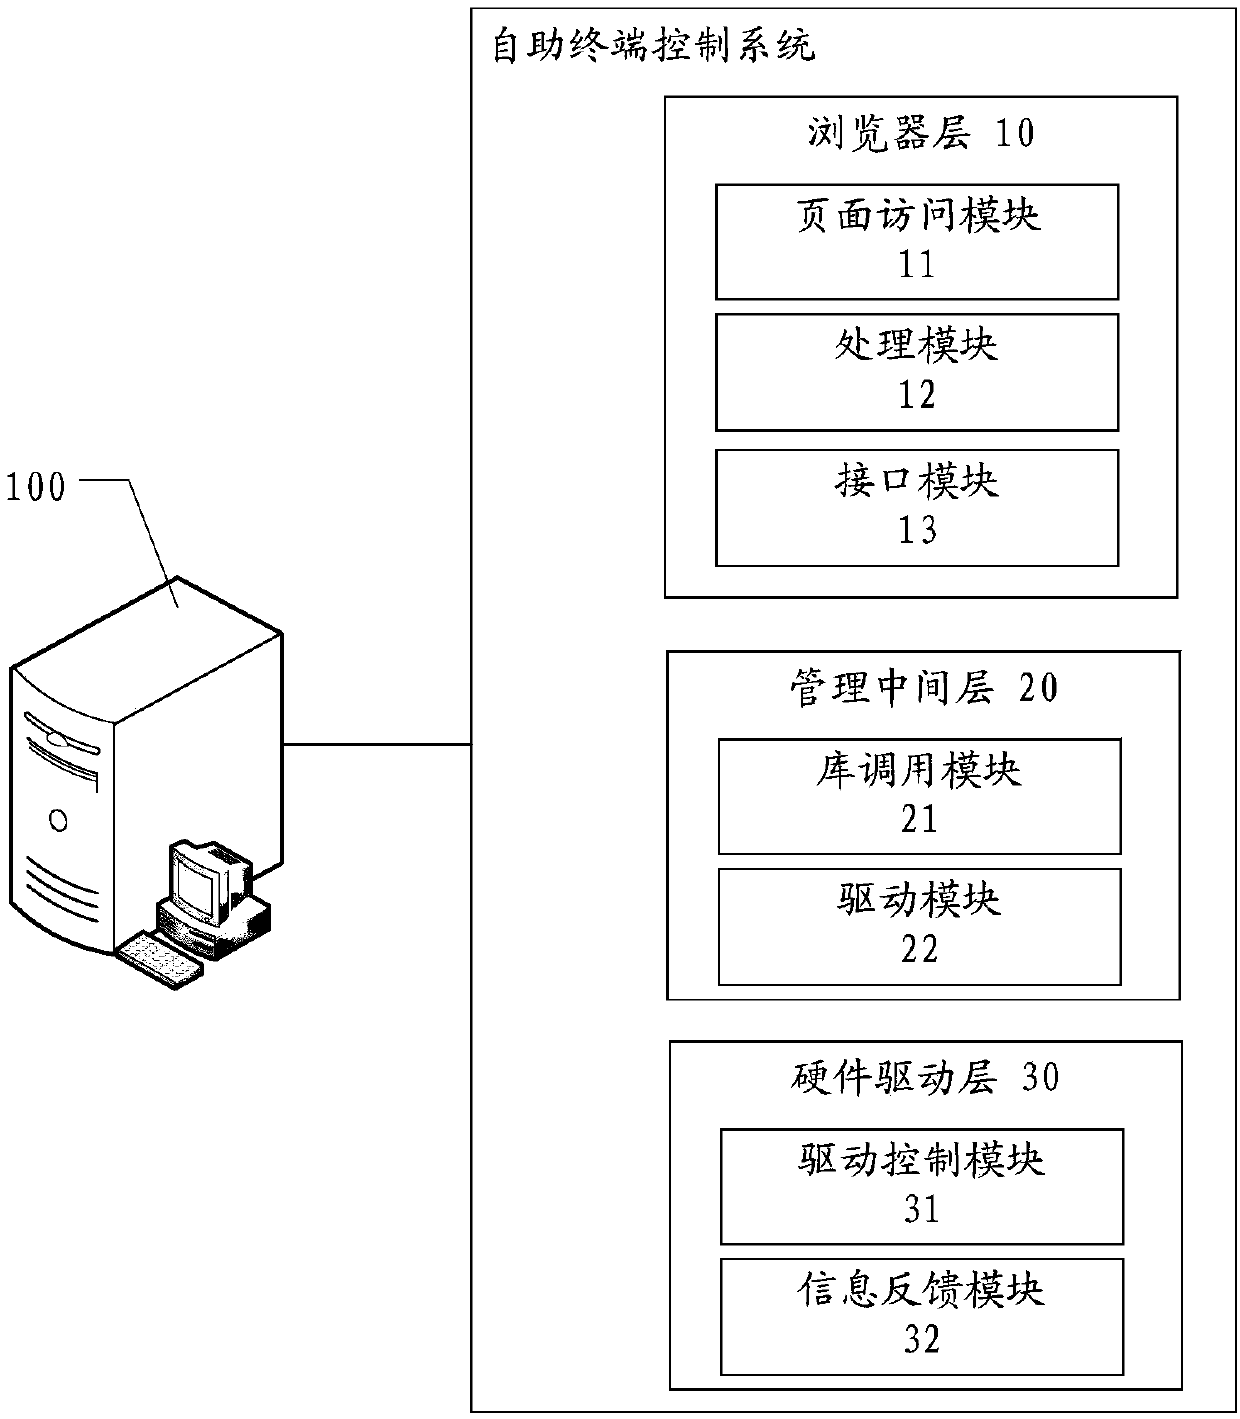 Self-service terminal control system based on browser